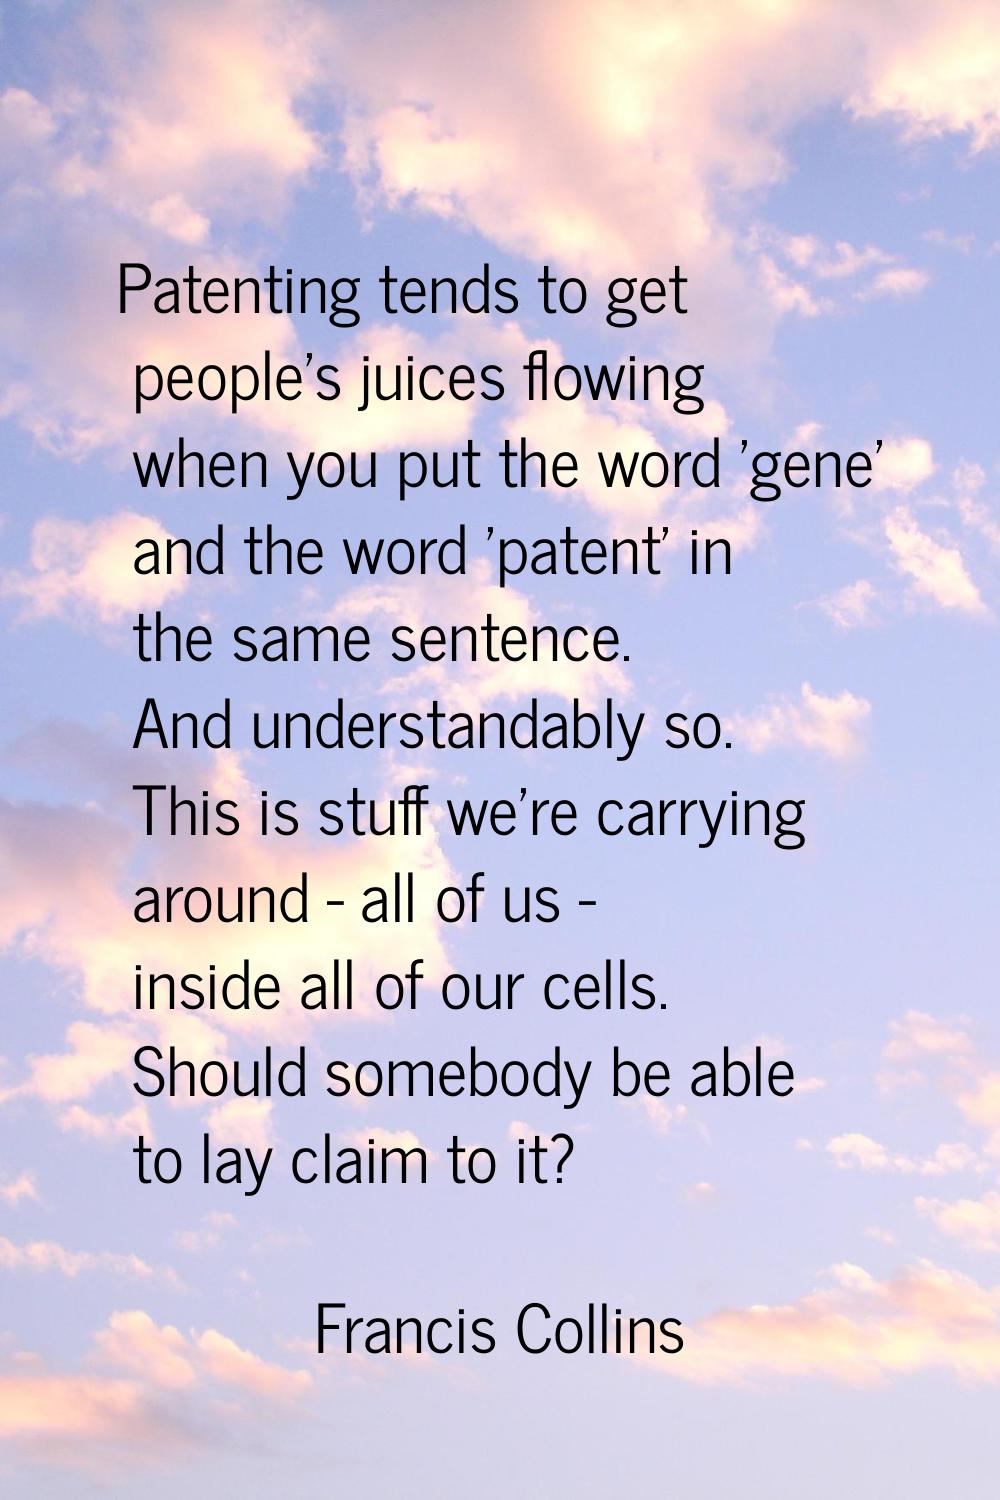 Patenting tends to get people's juices flowing when you put the word 'gene' and the word 'patent' i